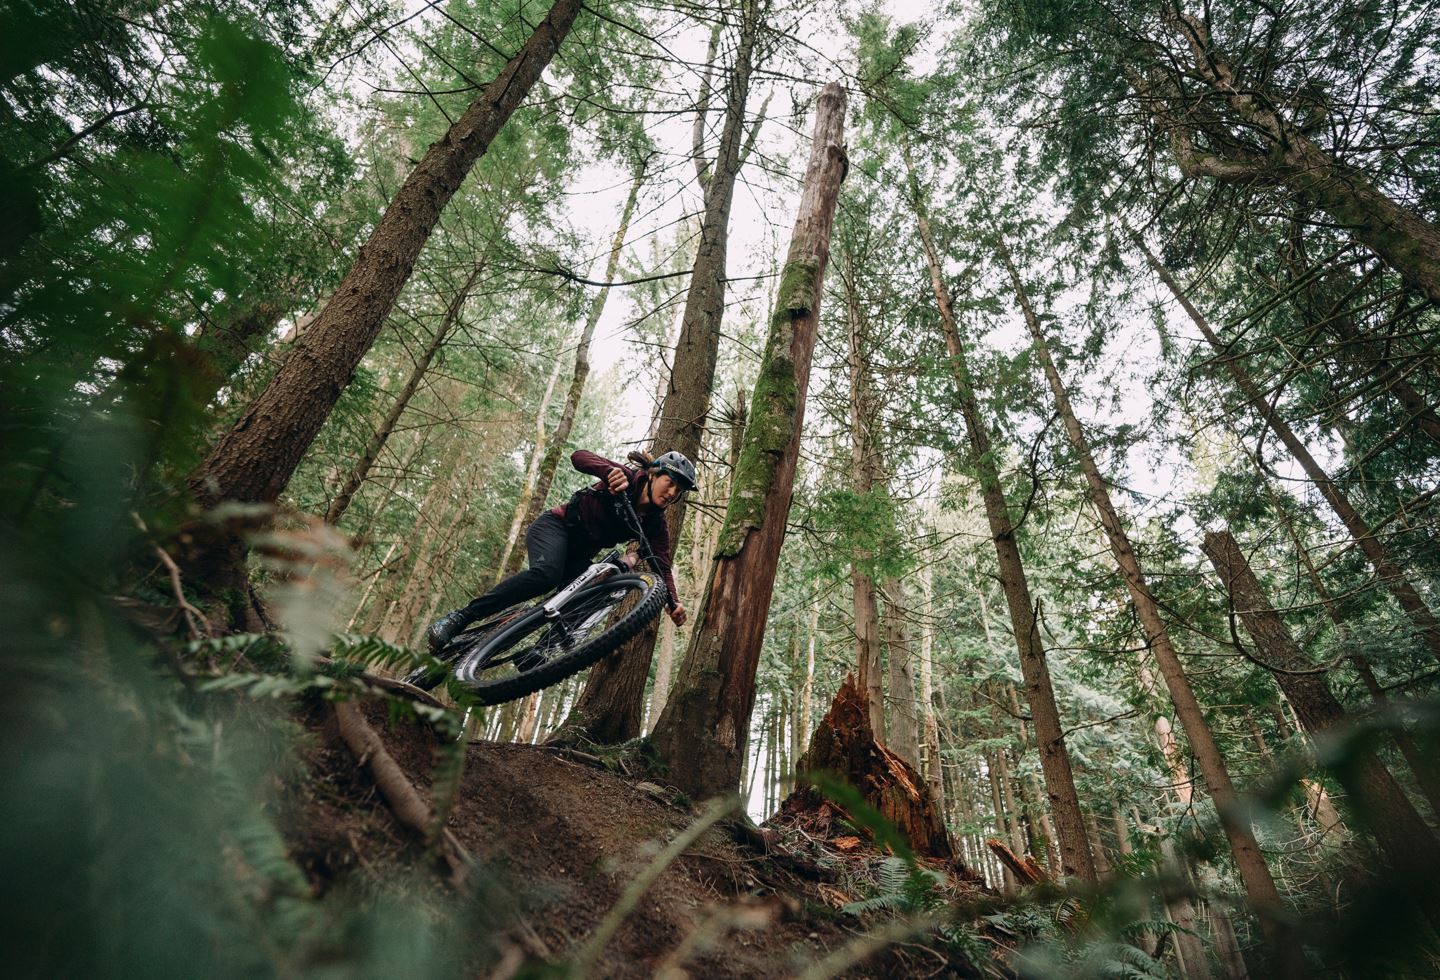 Rider in the forrest, charging down a steep, rocky descent